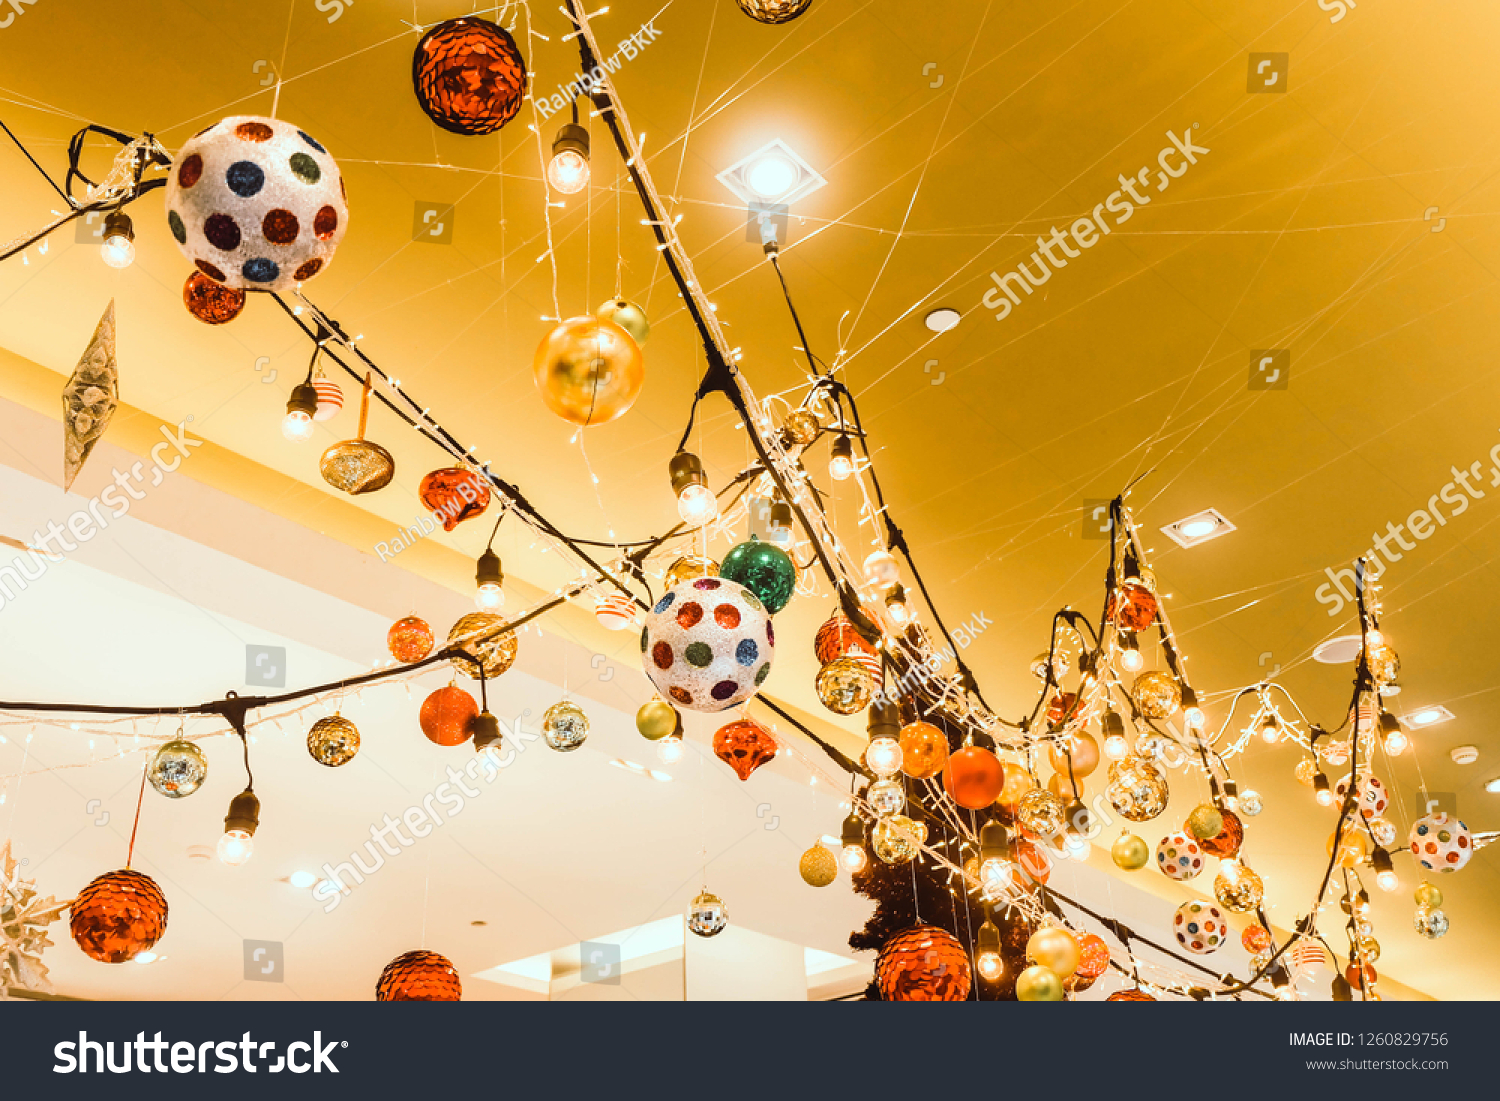 Colorful Christmas Balls Decoration Hanging Ceiling Stock